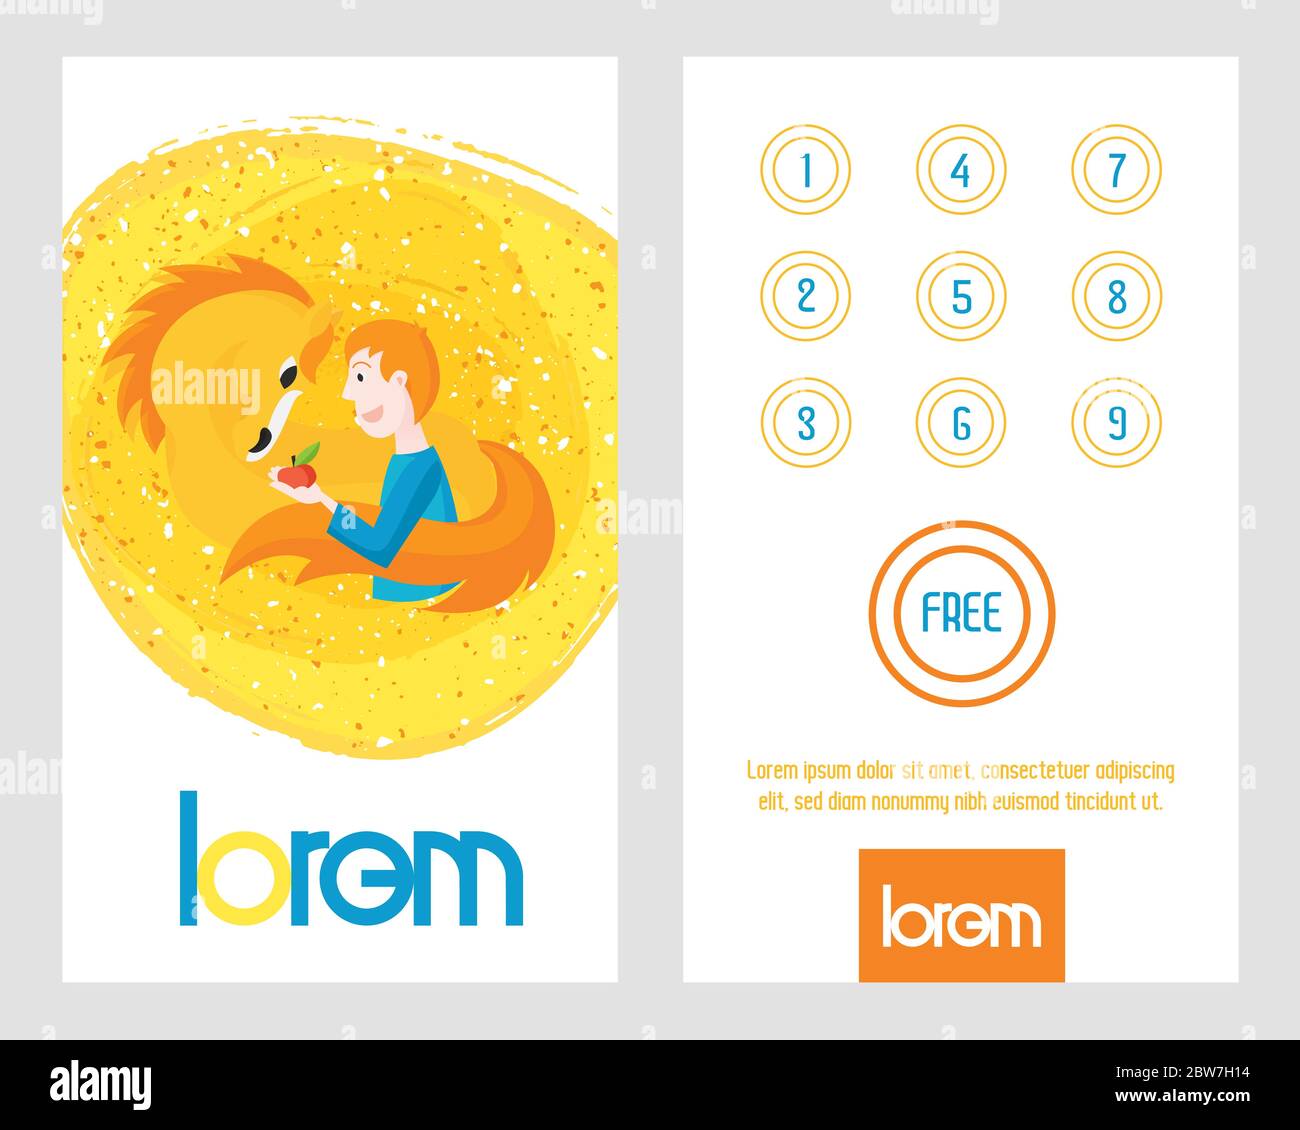 Buy 9 get 1 free card. Man with horse on loyalty card. Stock Vector